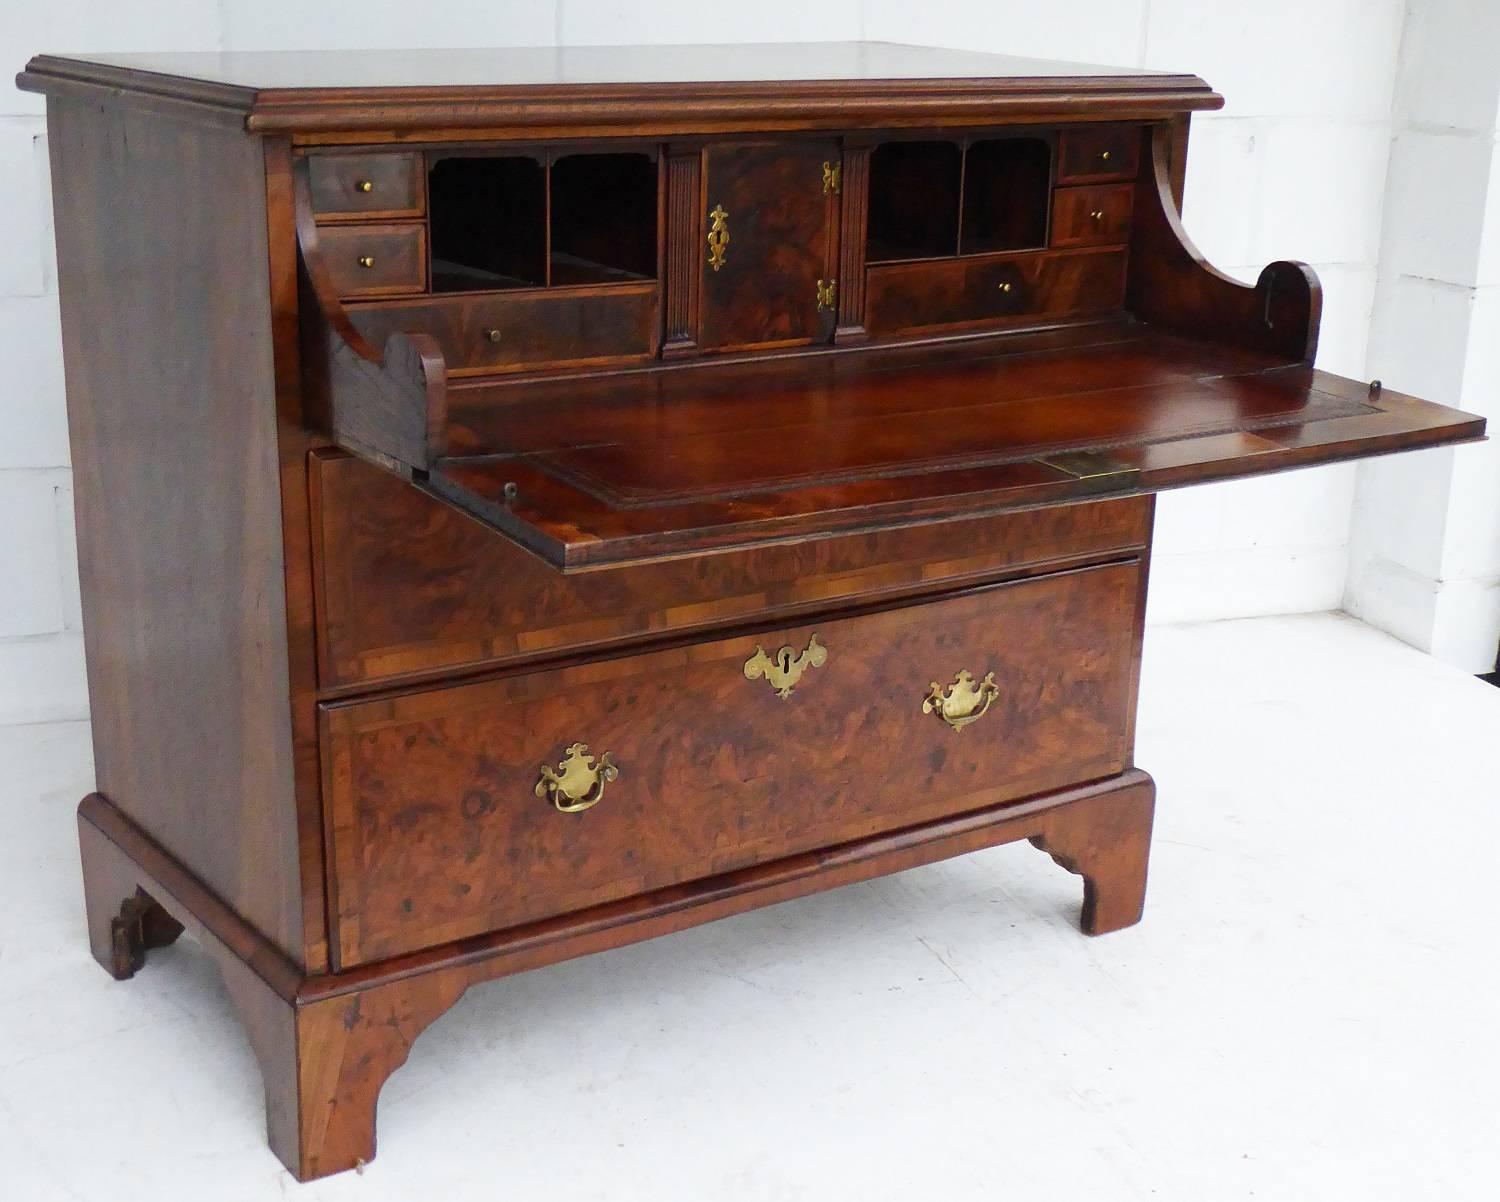 For sale is a good quality George III walnut secretaire chest. The top of the chest has nice walnut banding above three drawers. The top drawer, having a fall front, opens to reveal a fully fitted secretaire, with a hand dyed 